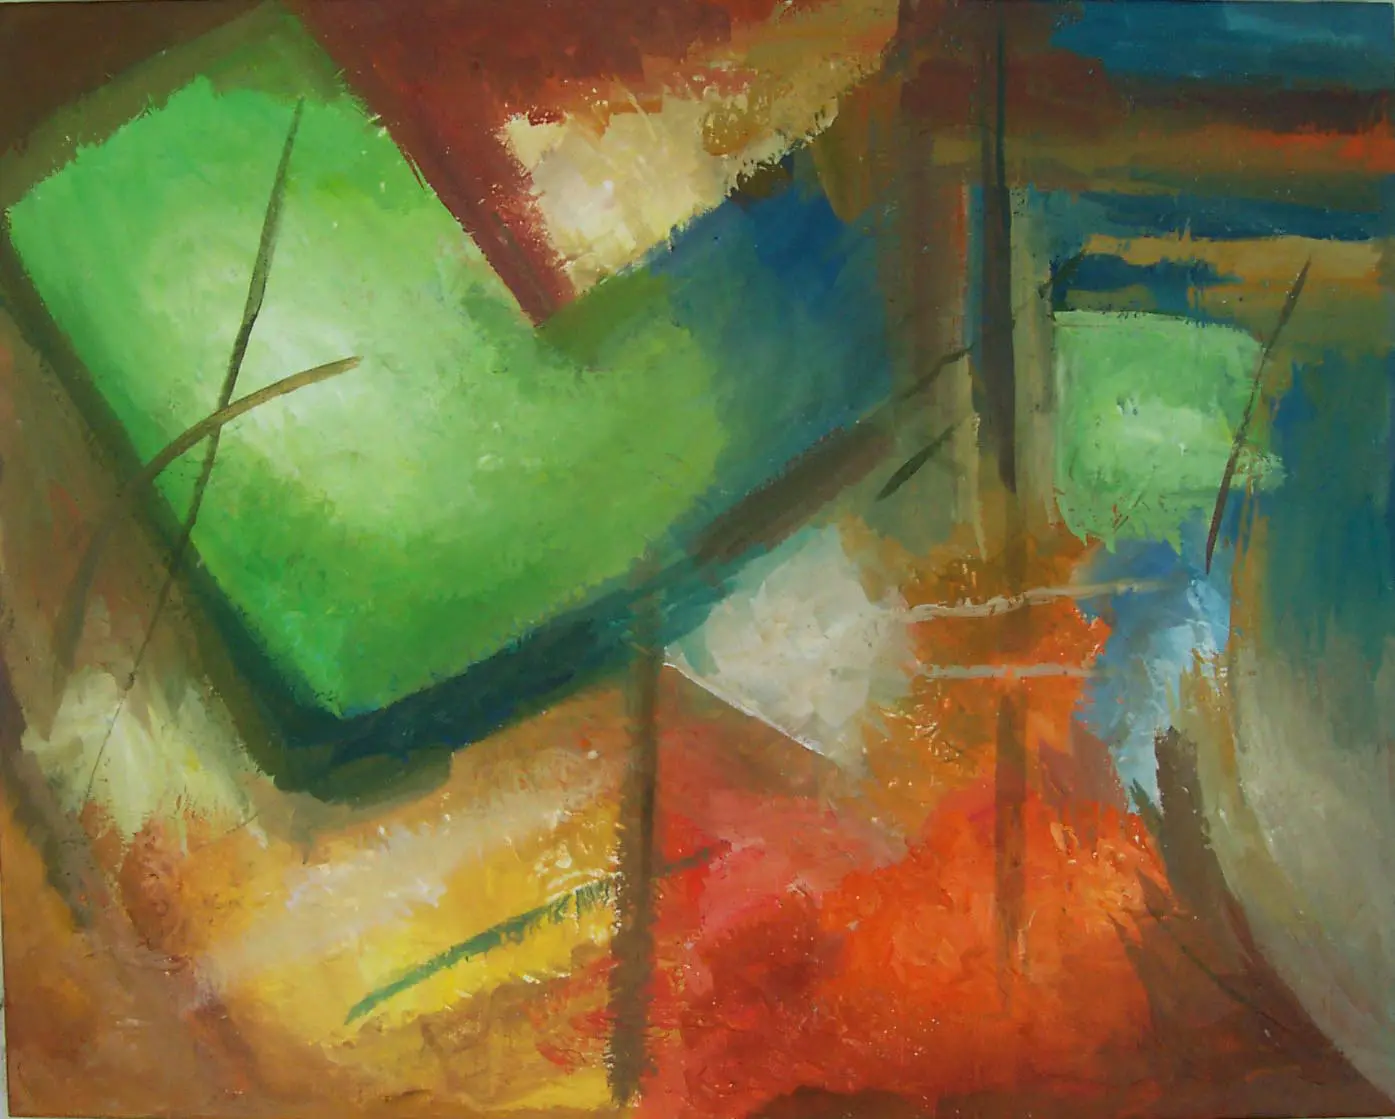 A painting of green and red abstract shapes